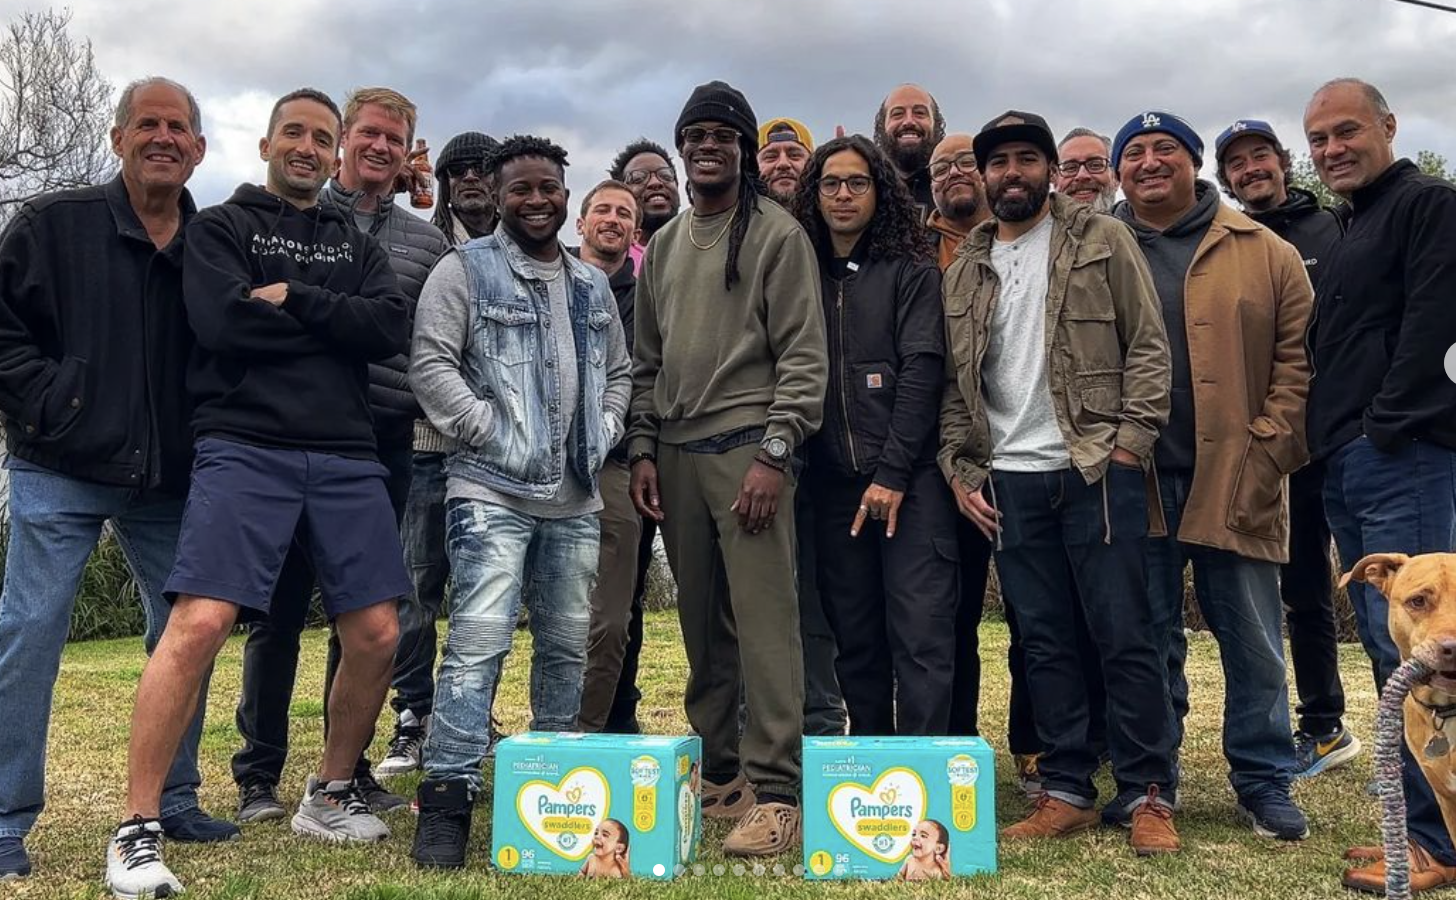 Group of people smiling outdoors with two boxes of Pampers in front, a dog on the right